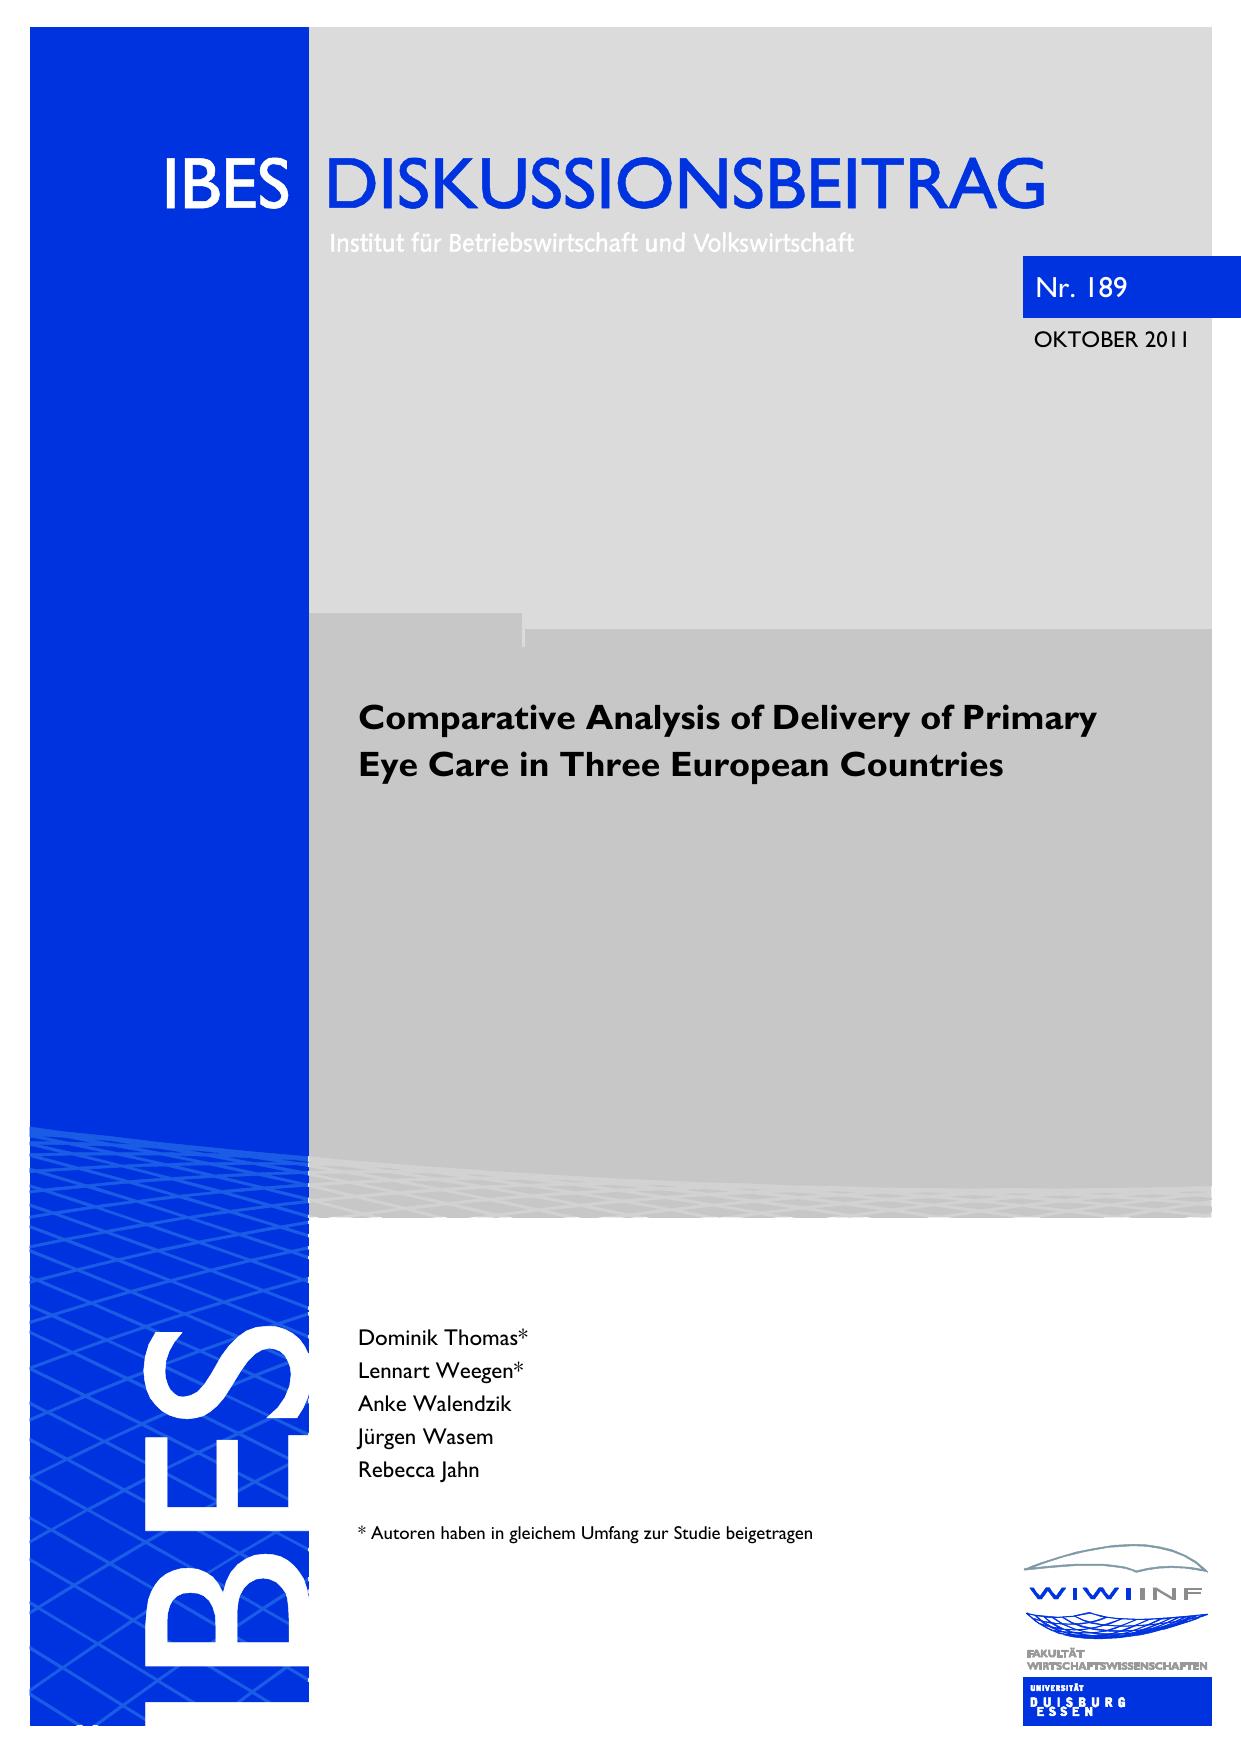 Comparative Analysis of Delivery of Primary Eye Care in Three 2011